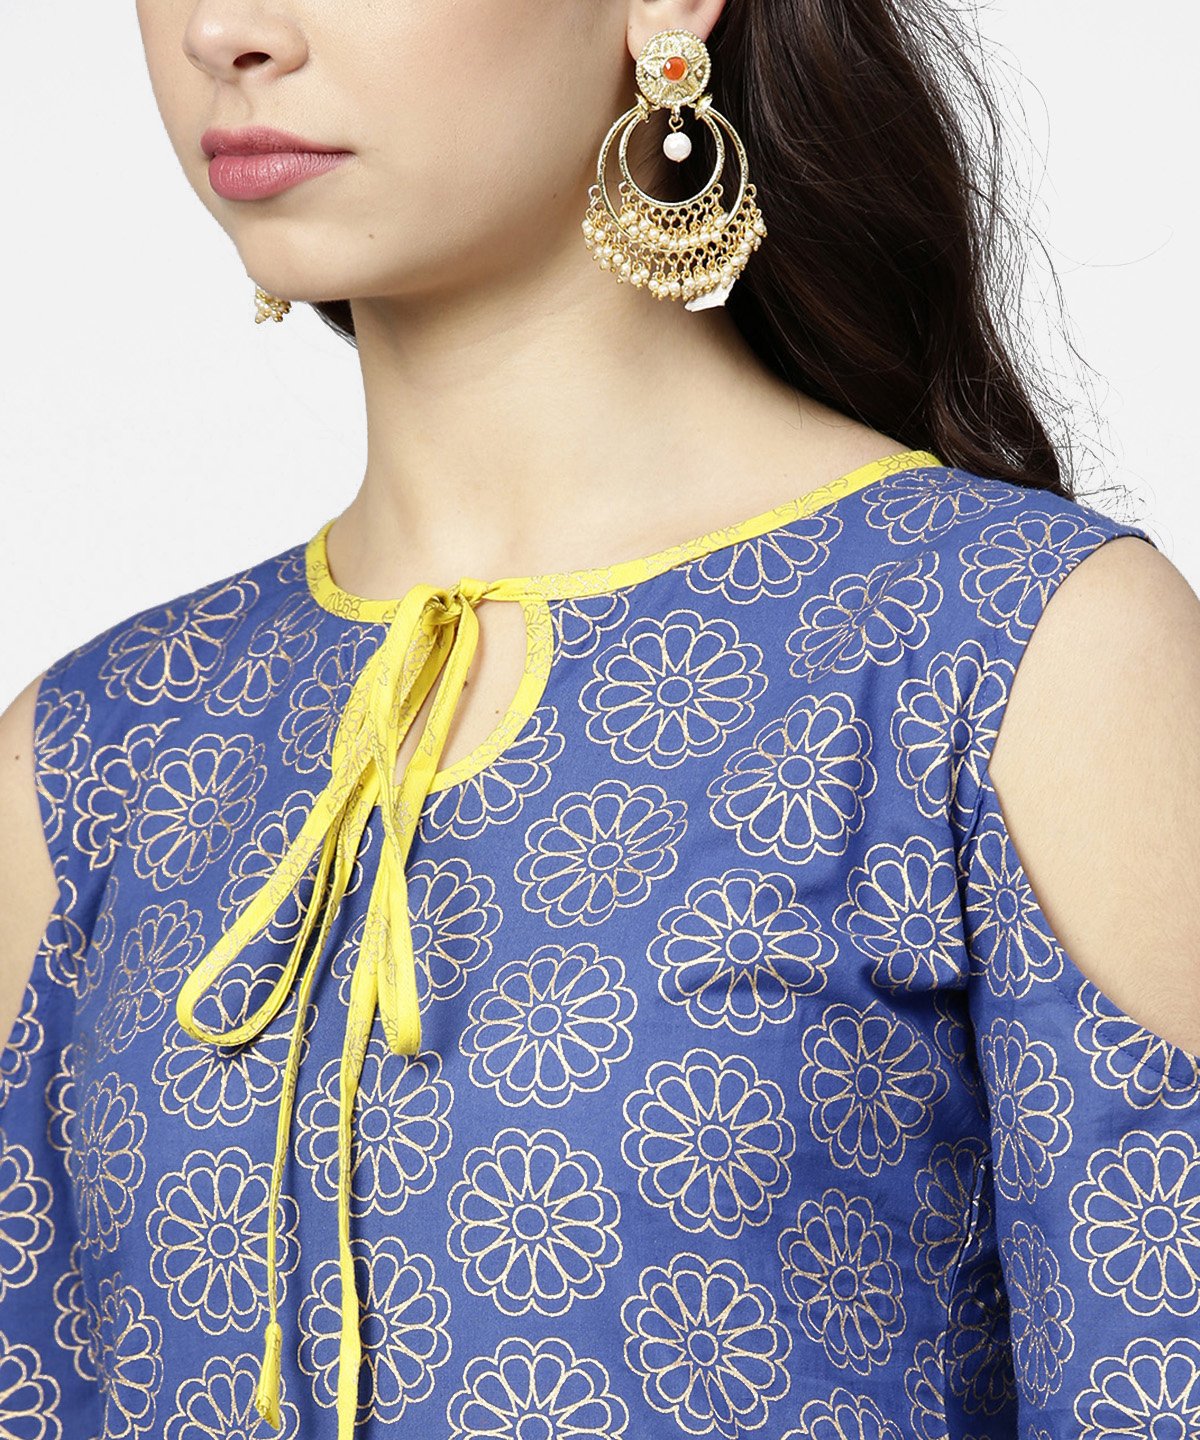 Women's Blue Printed 3/4Th Cold Shoulder Sleeve Kurta With Yellow Flared Skirt - Nayo Clothing